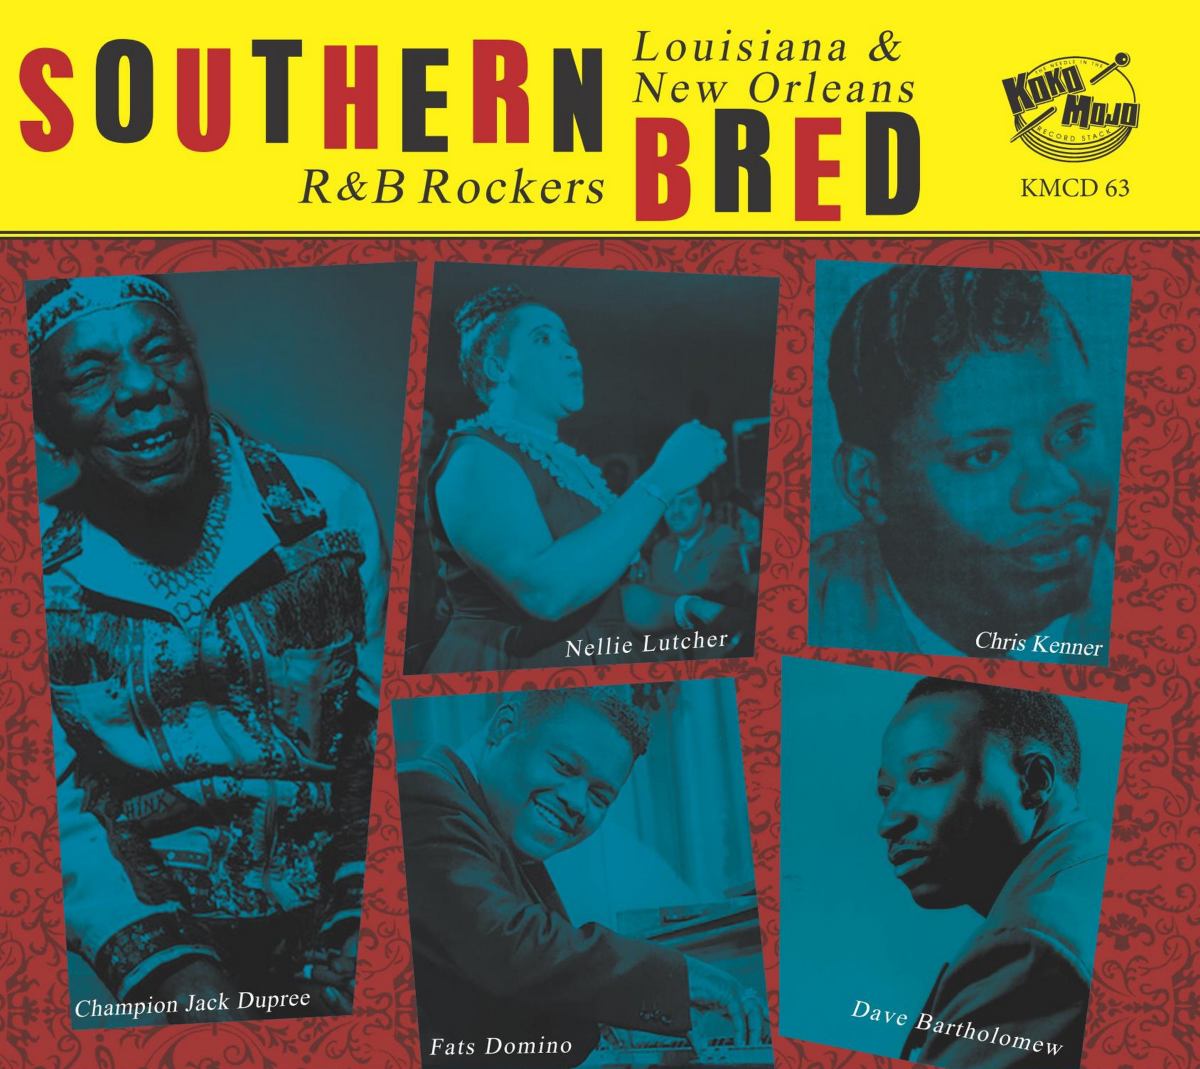 Southern Bred